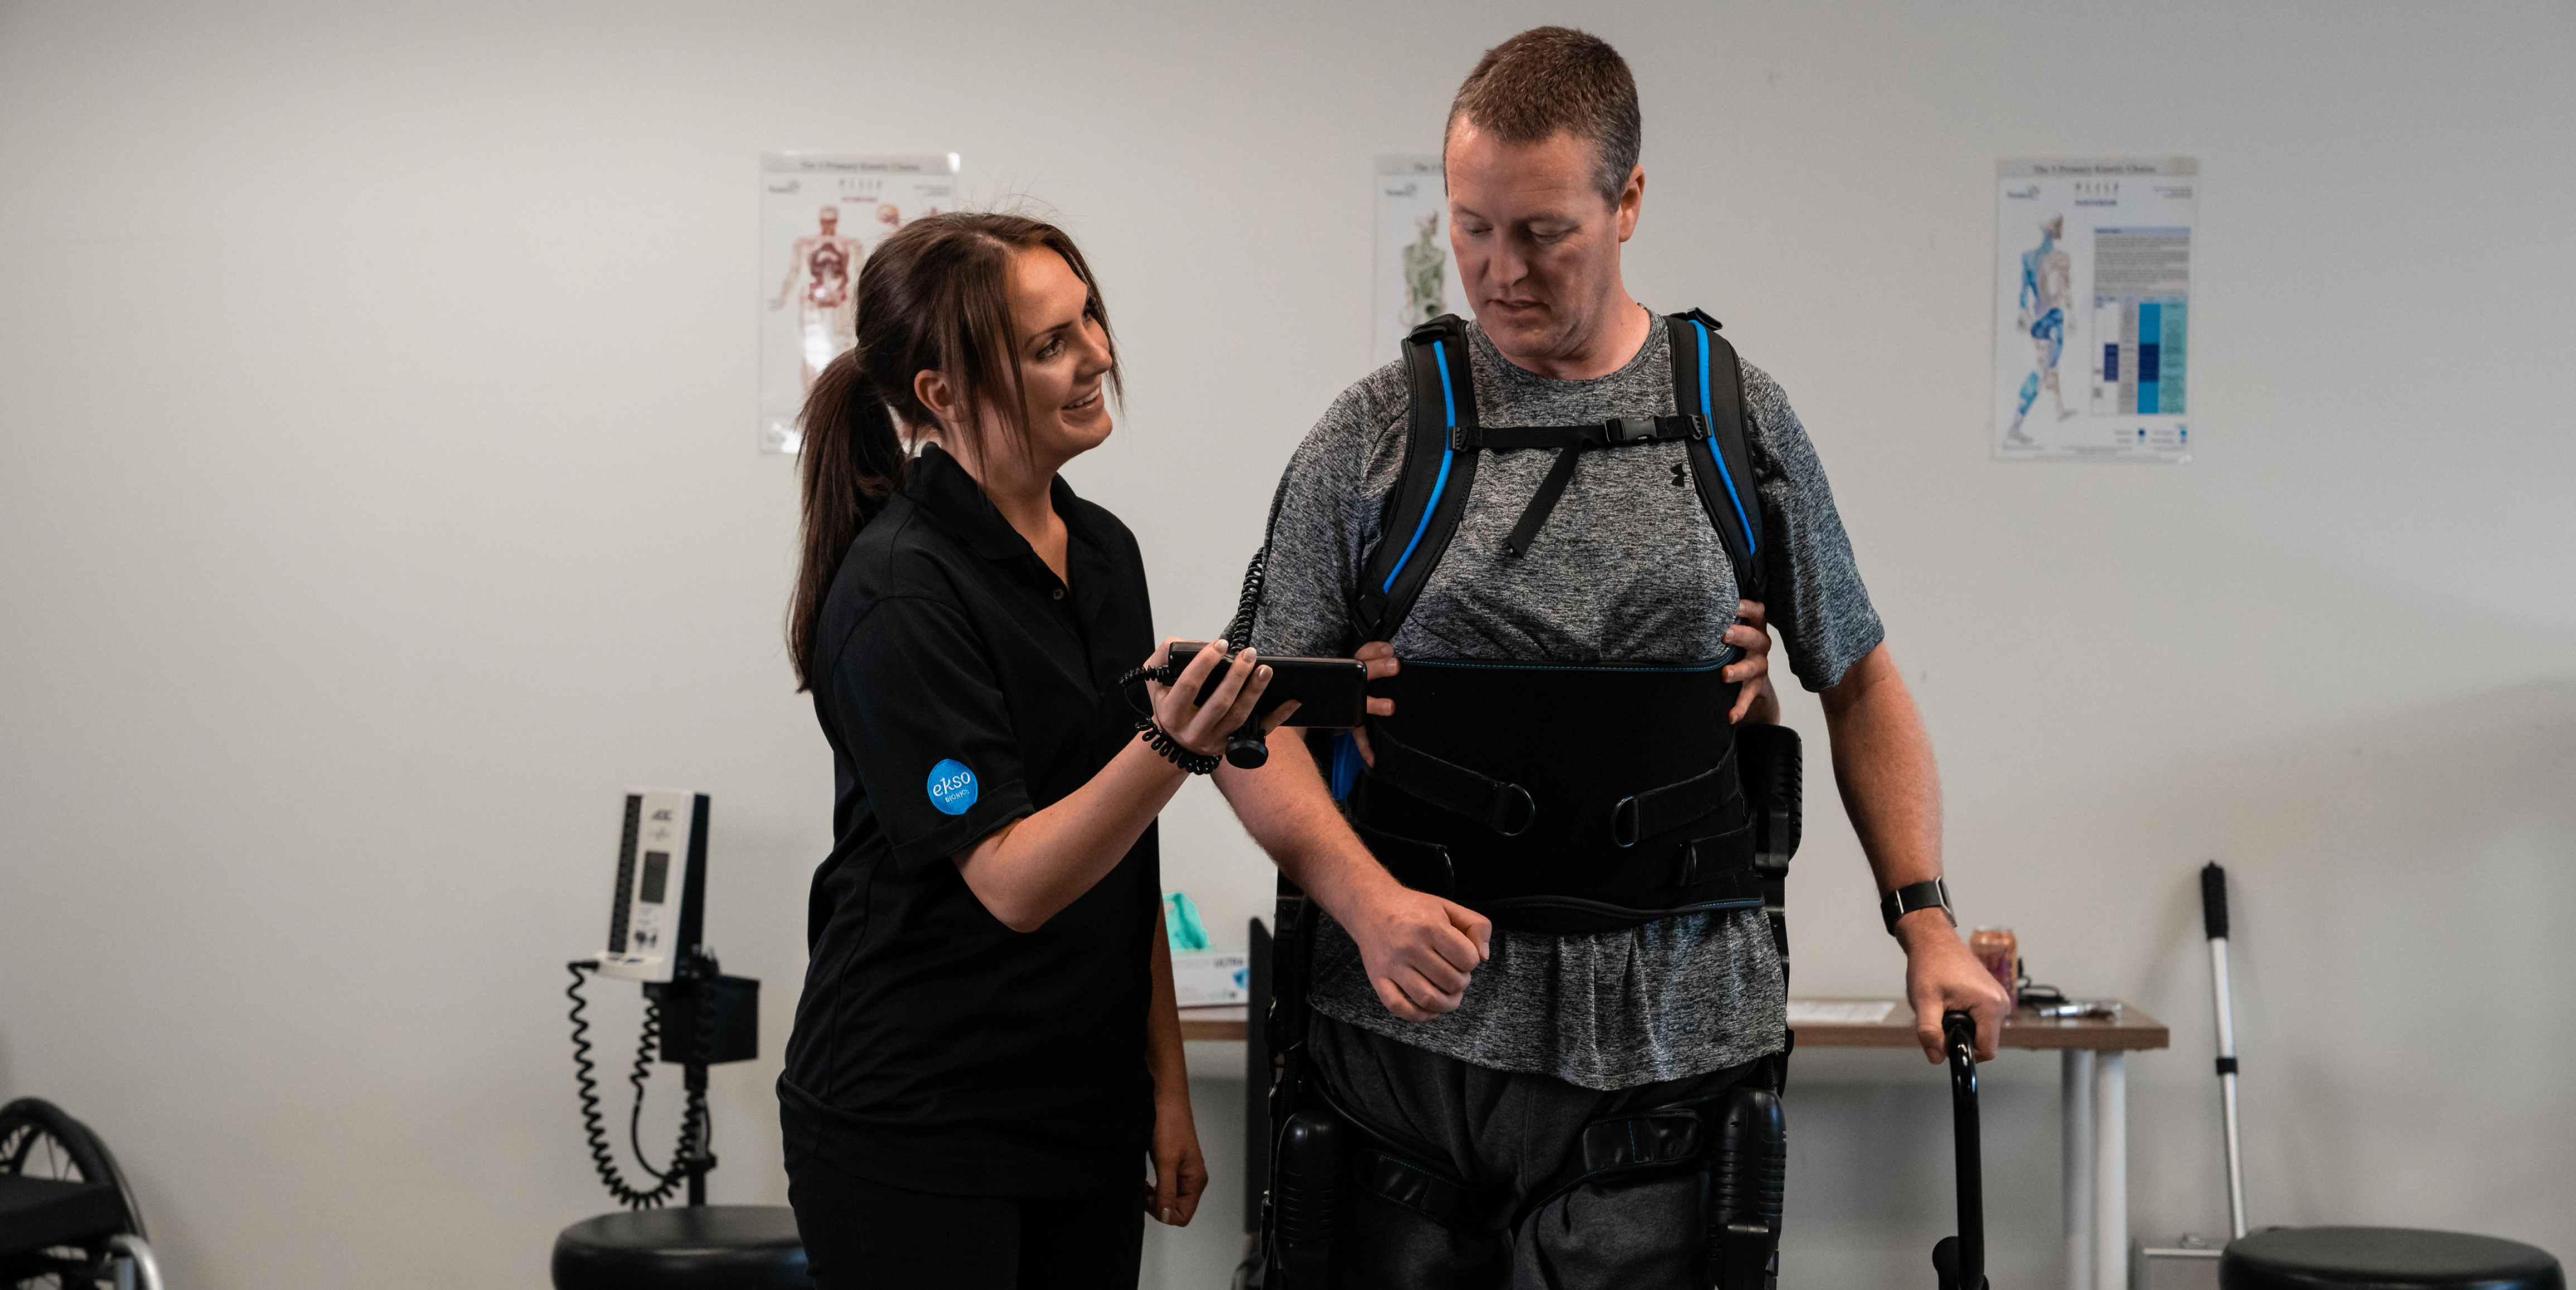 The Impact of Medical Exoskeletons on Patients and Physical Therapists